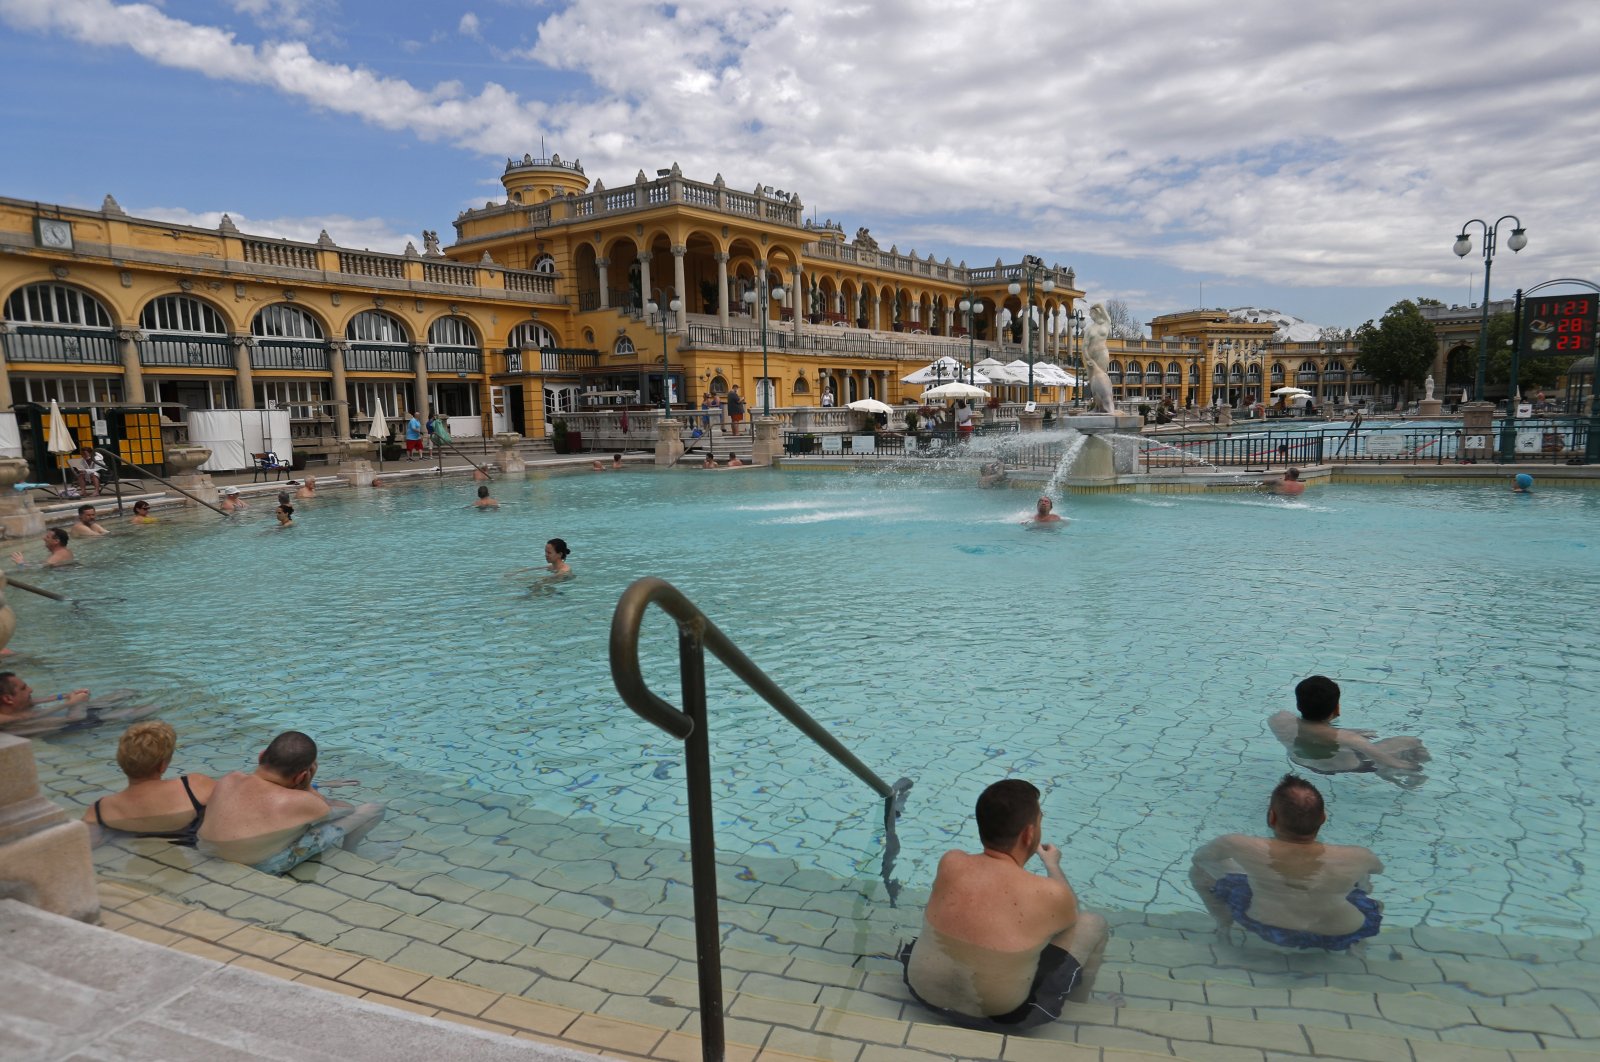 People visit the reopened Szechenyi bath in Budapest, Hungary, May 1, 2021. (AP Photo)